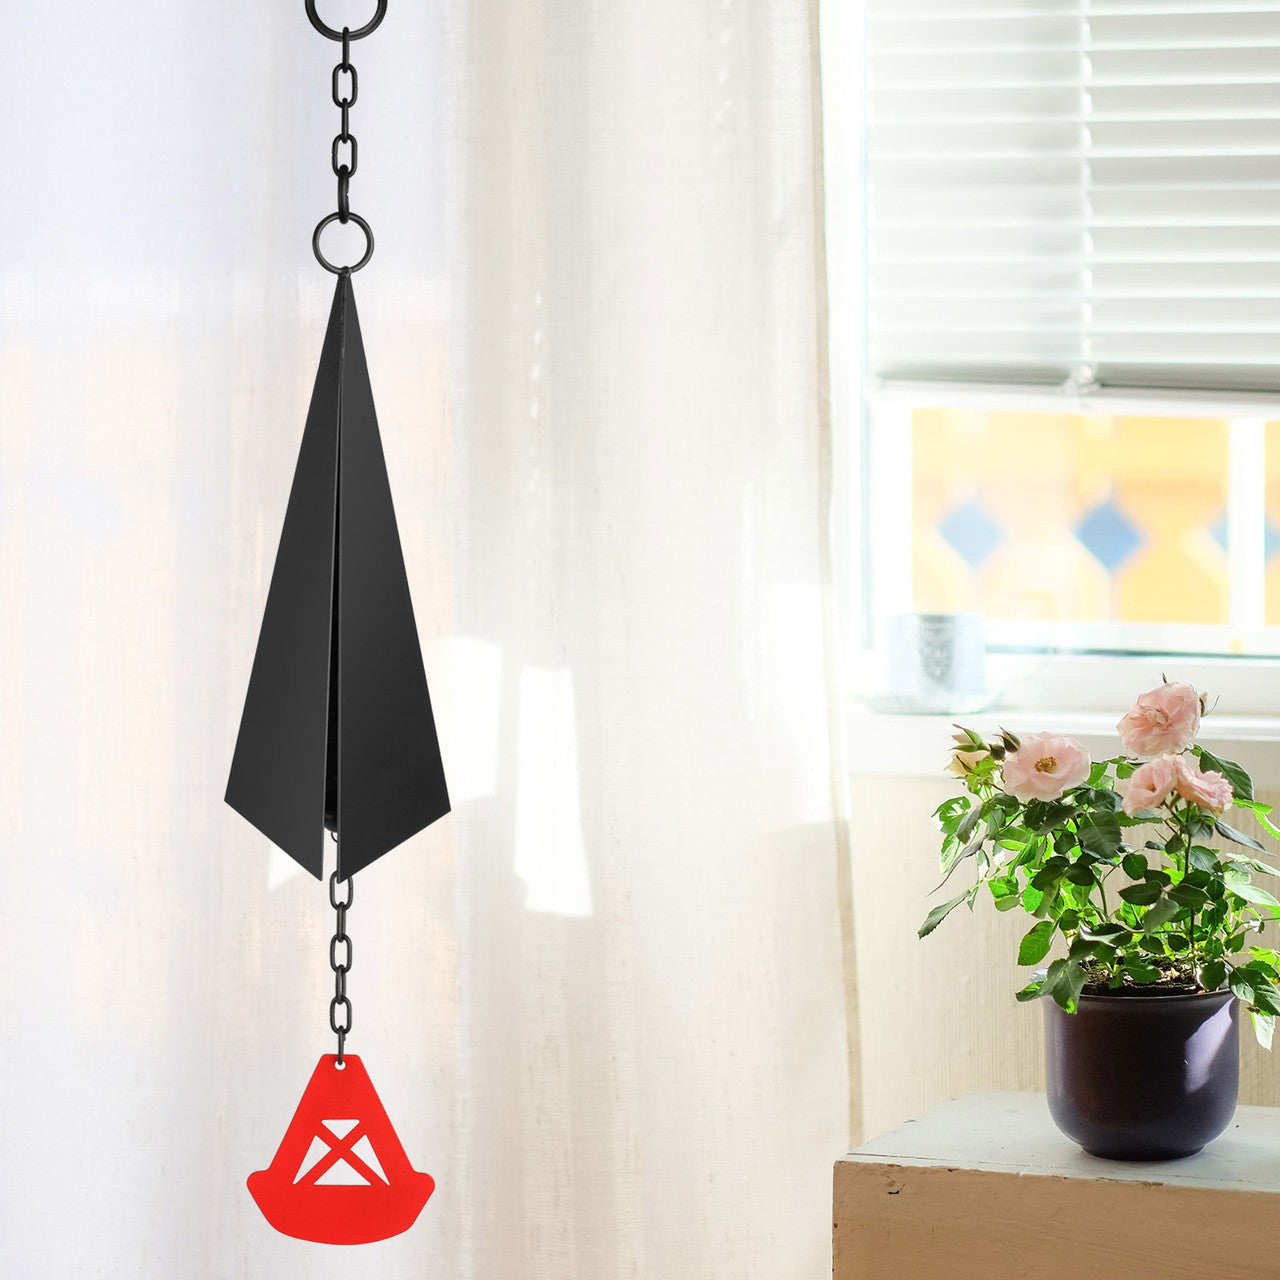 Sturdy and Durable Memorial Wind Bell Chimes with a Unique Hanging Decoration Style